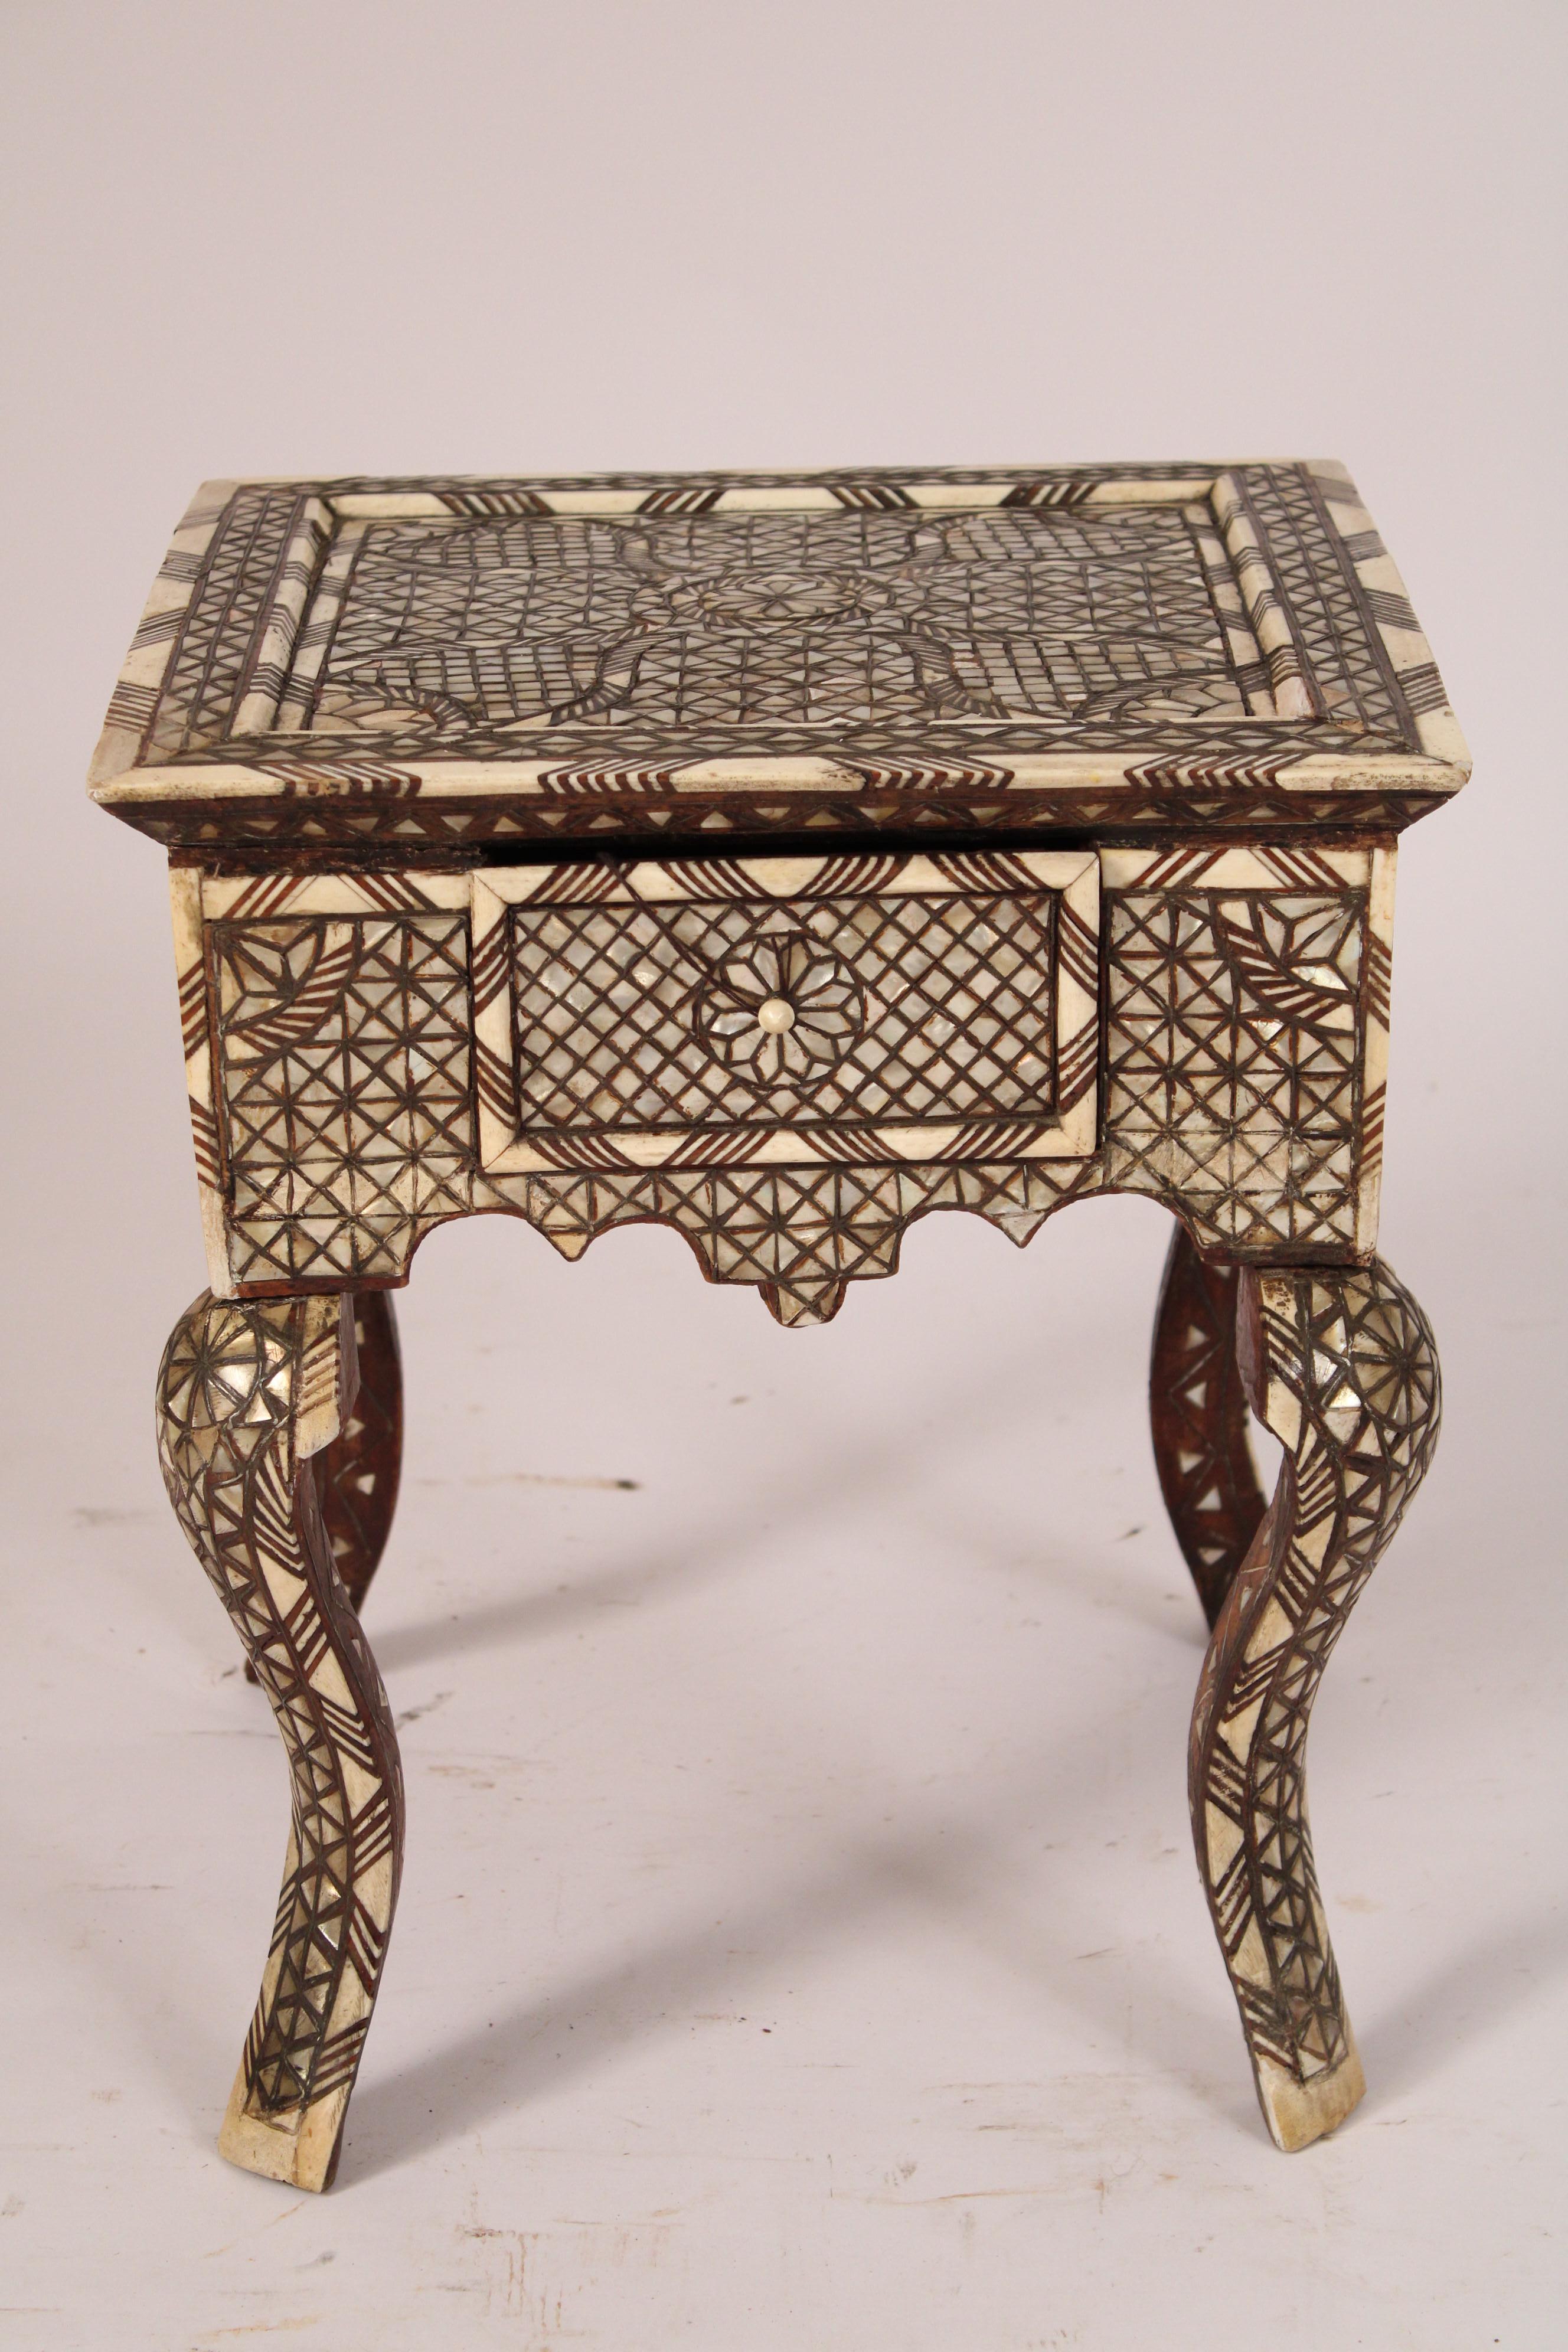 Middle Eastern mother of pearl and bone inlaid side table, circa 1920's. With a square mother of pearl and bone inlaid slightly overhanging top, a frieze drawer, scalloped apron, resting on cabriole legs. 